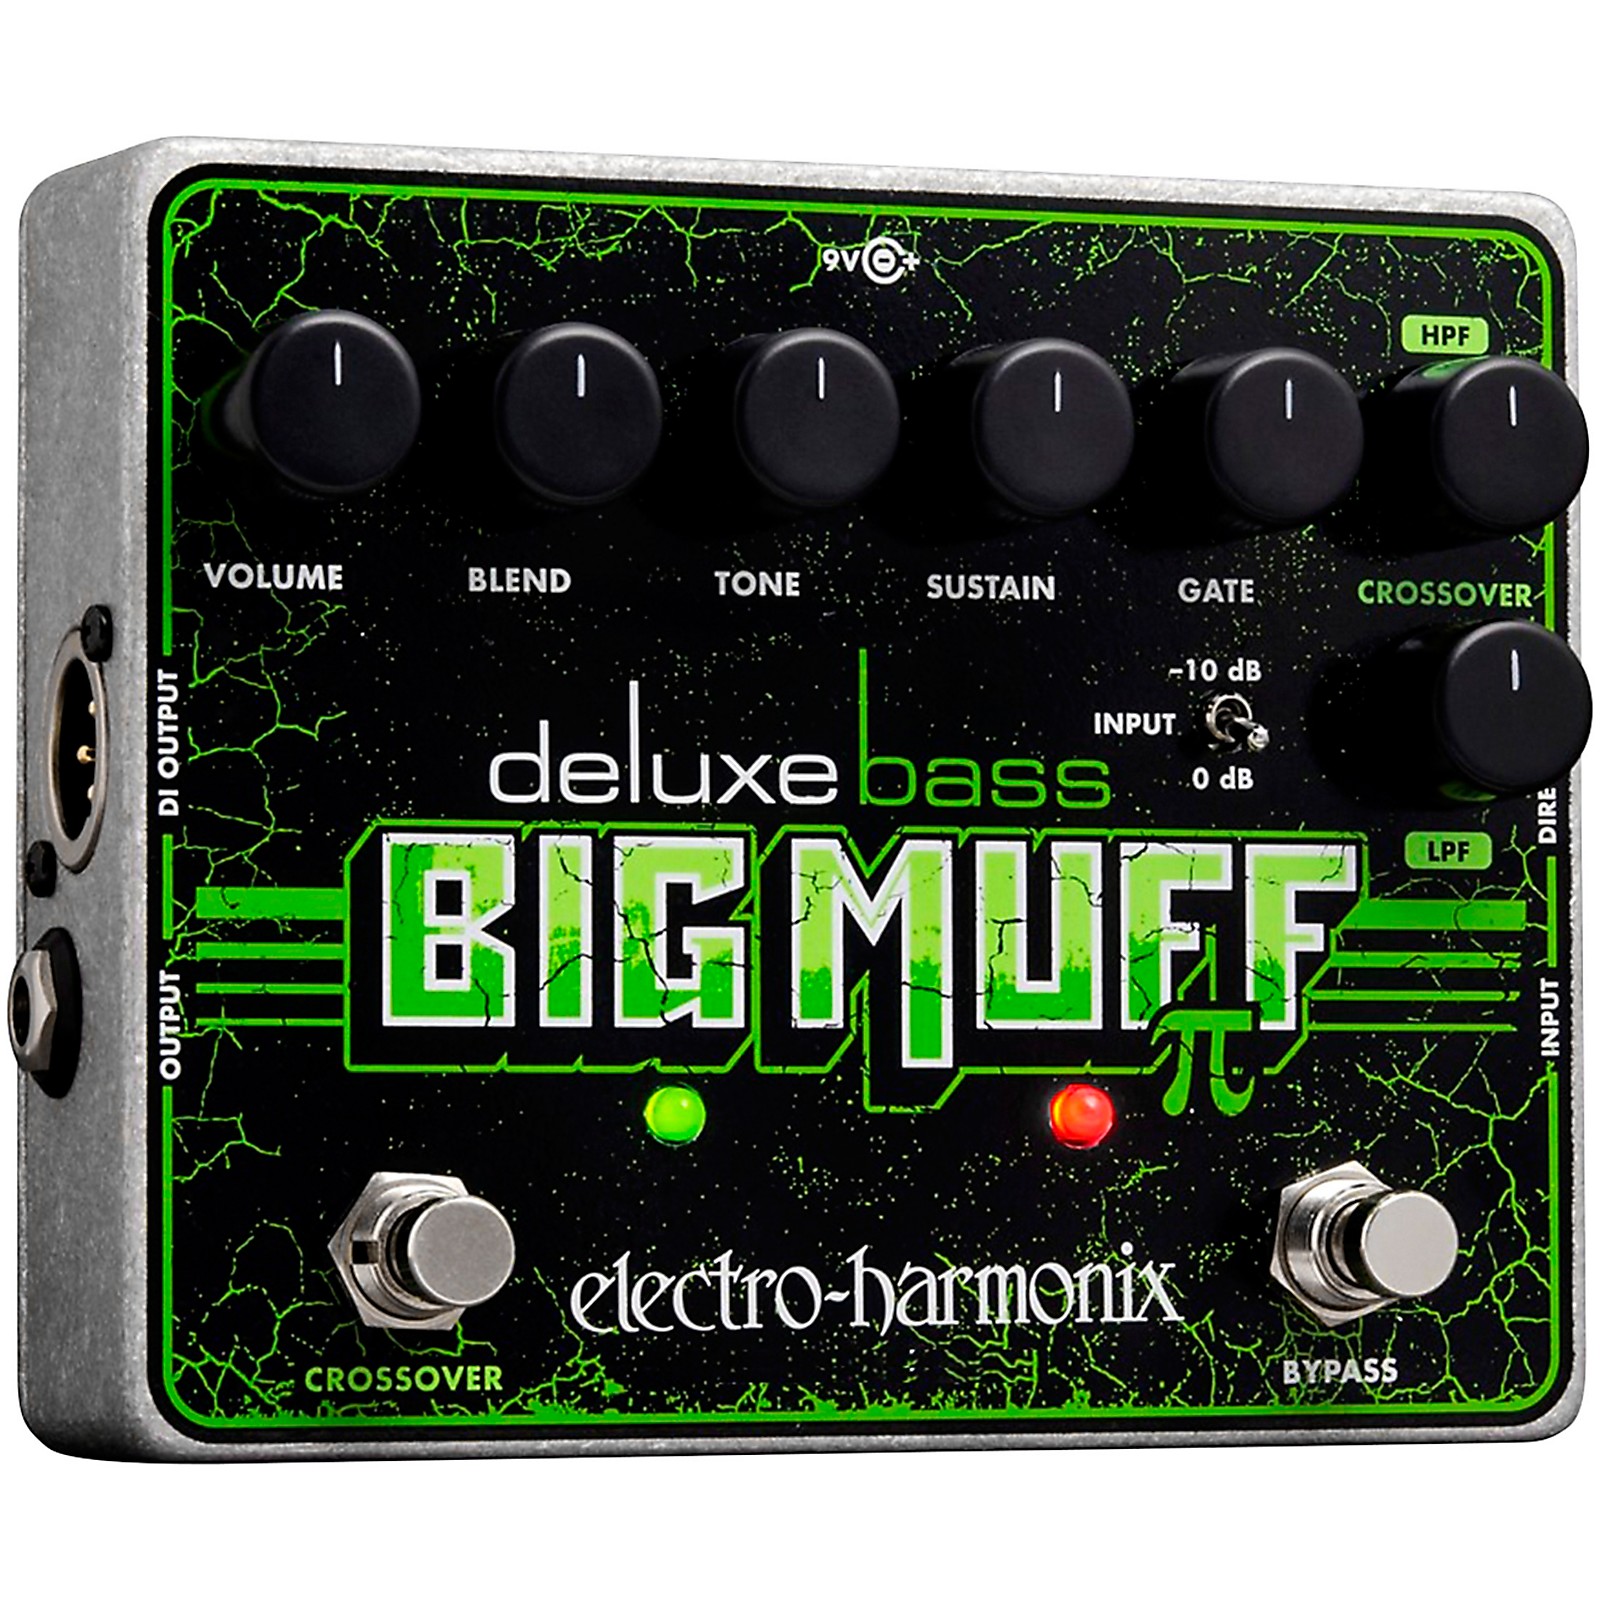 Electro-Harmonix Deluxe Bass Big Muff Pi Distortion Effects Pedal